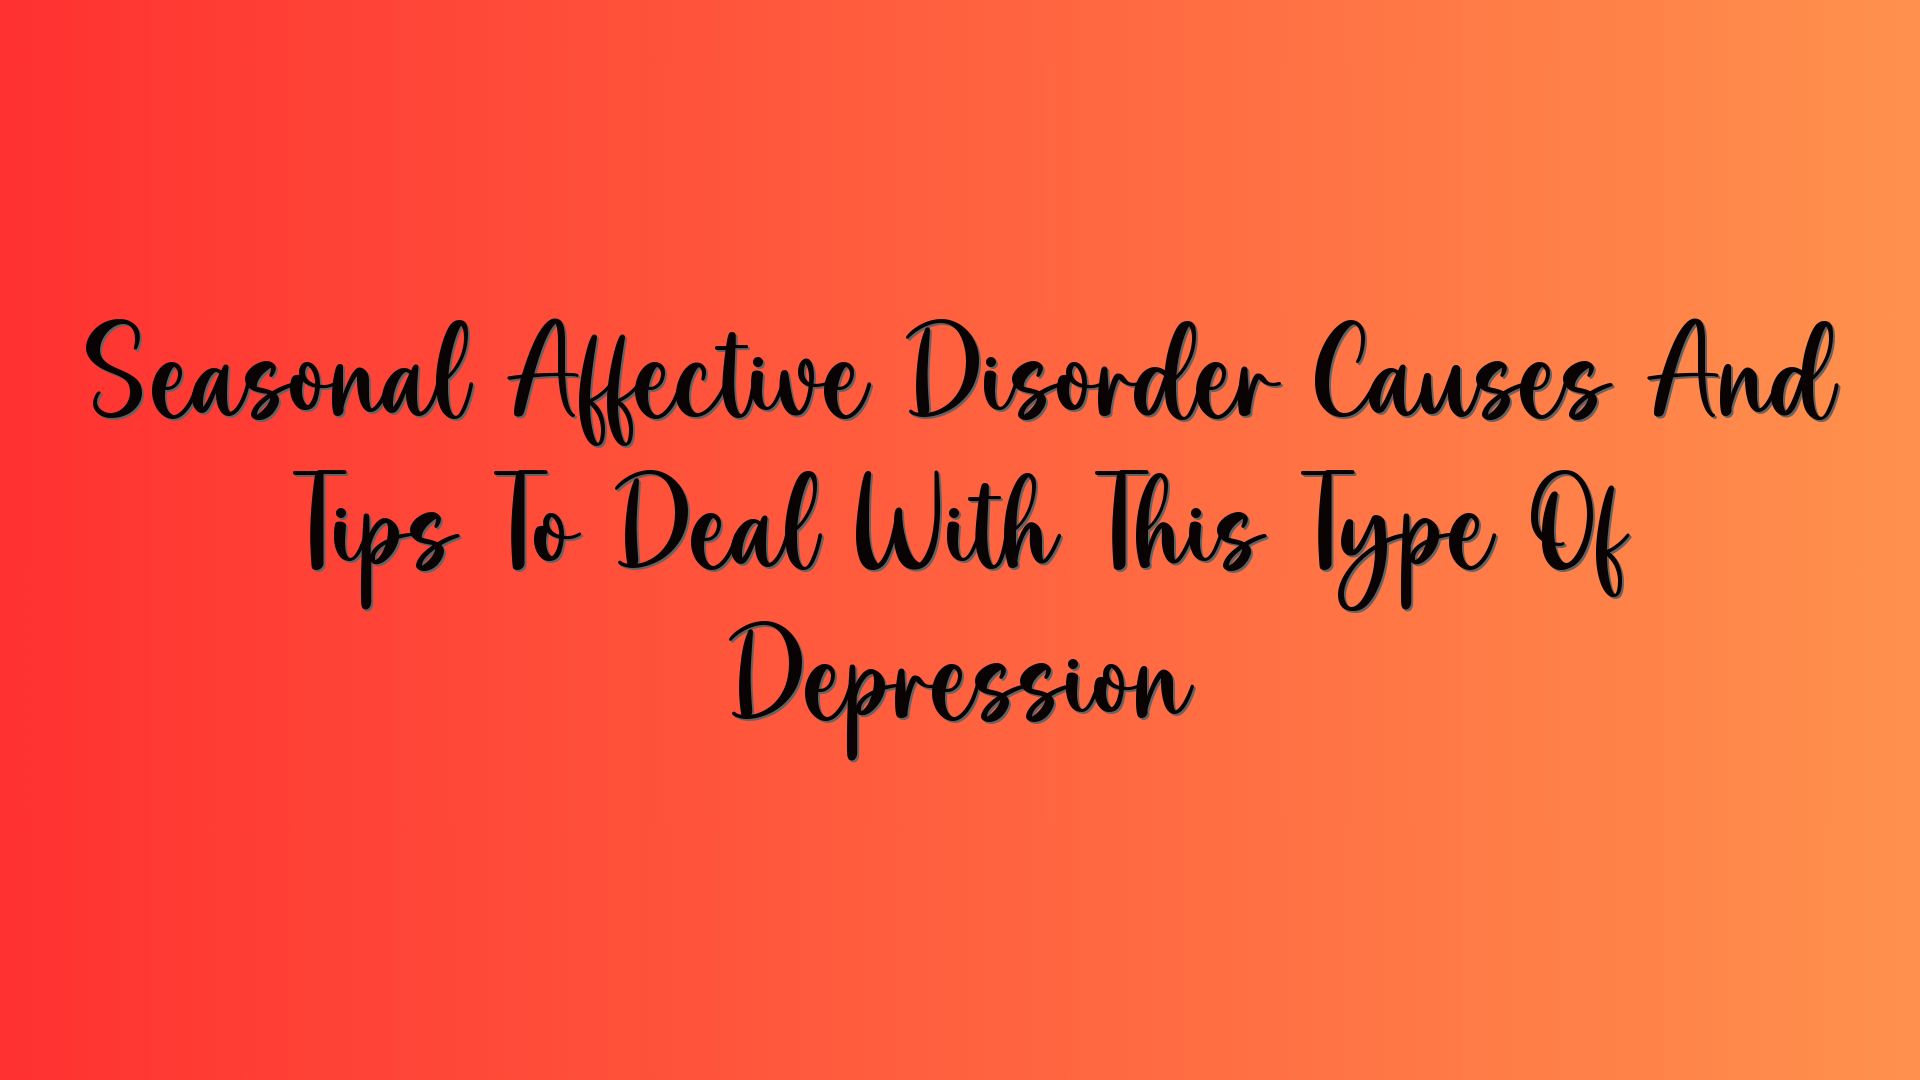 Seasonal Affective Disorder Causes And Tips To Deal With This Type Of Depression